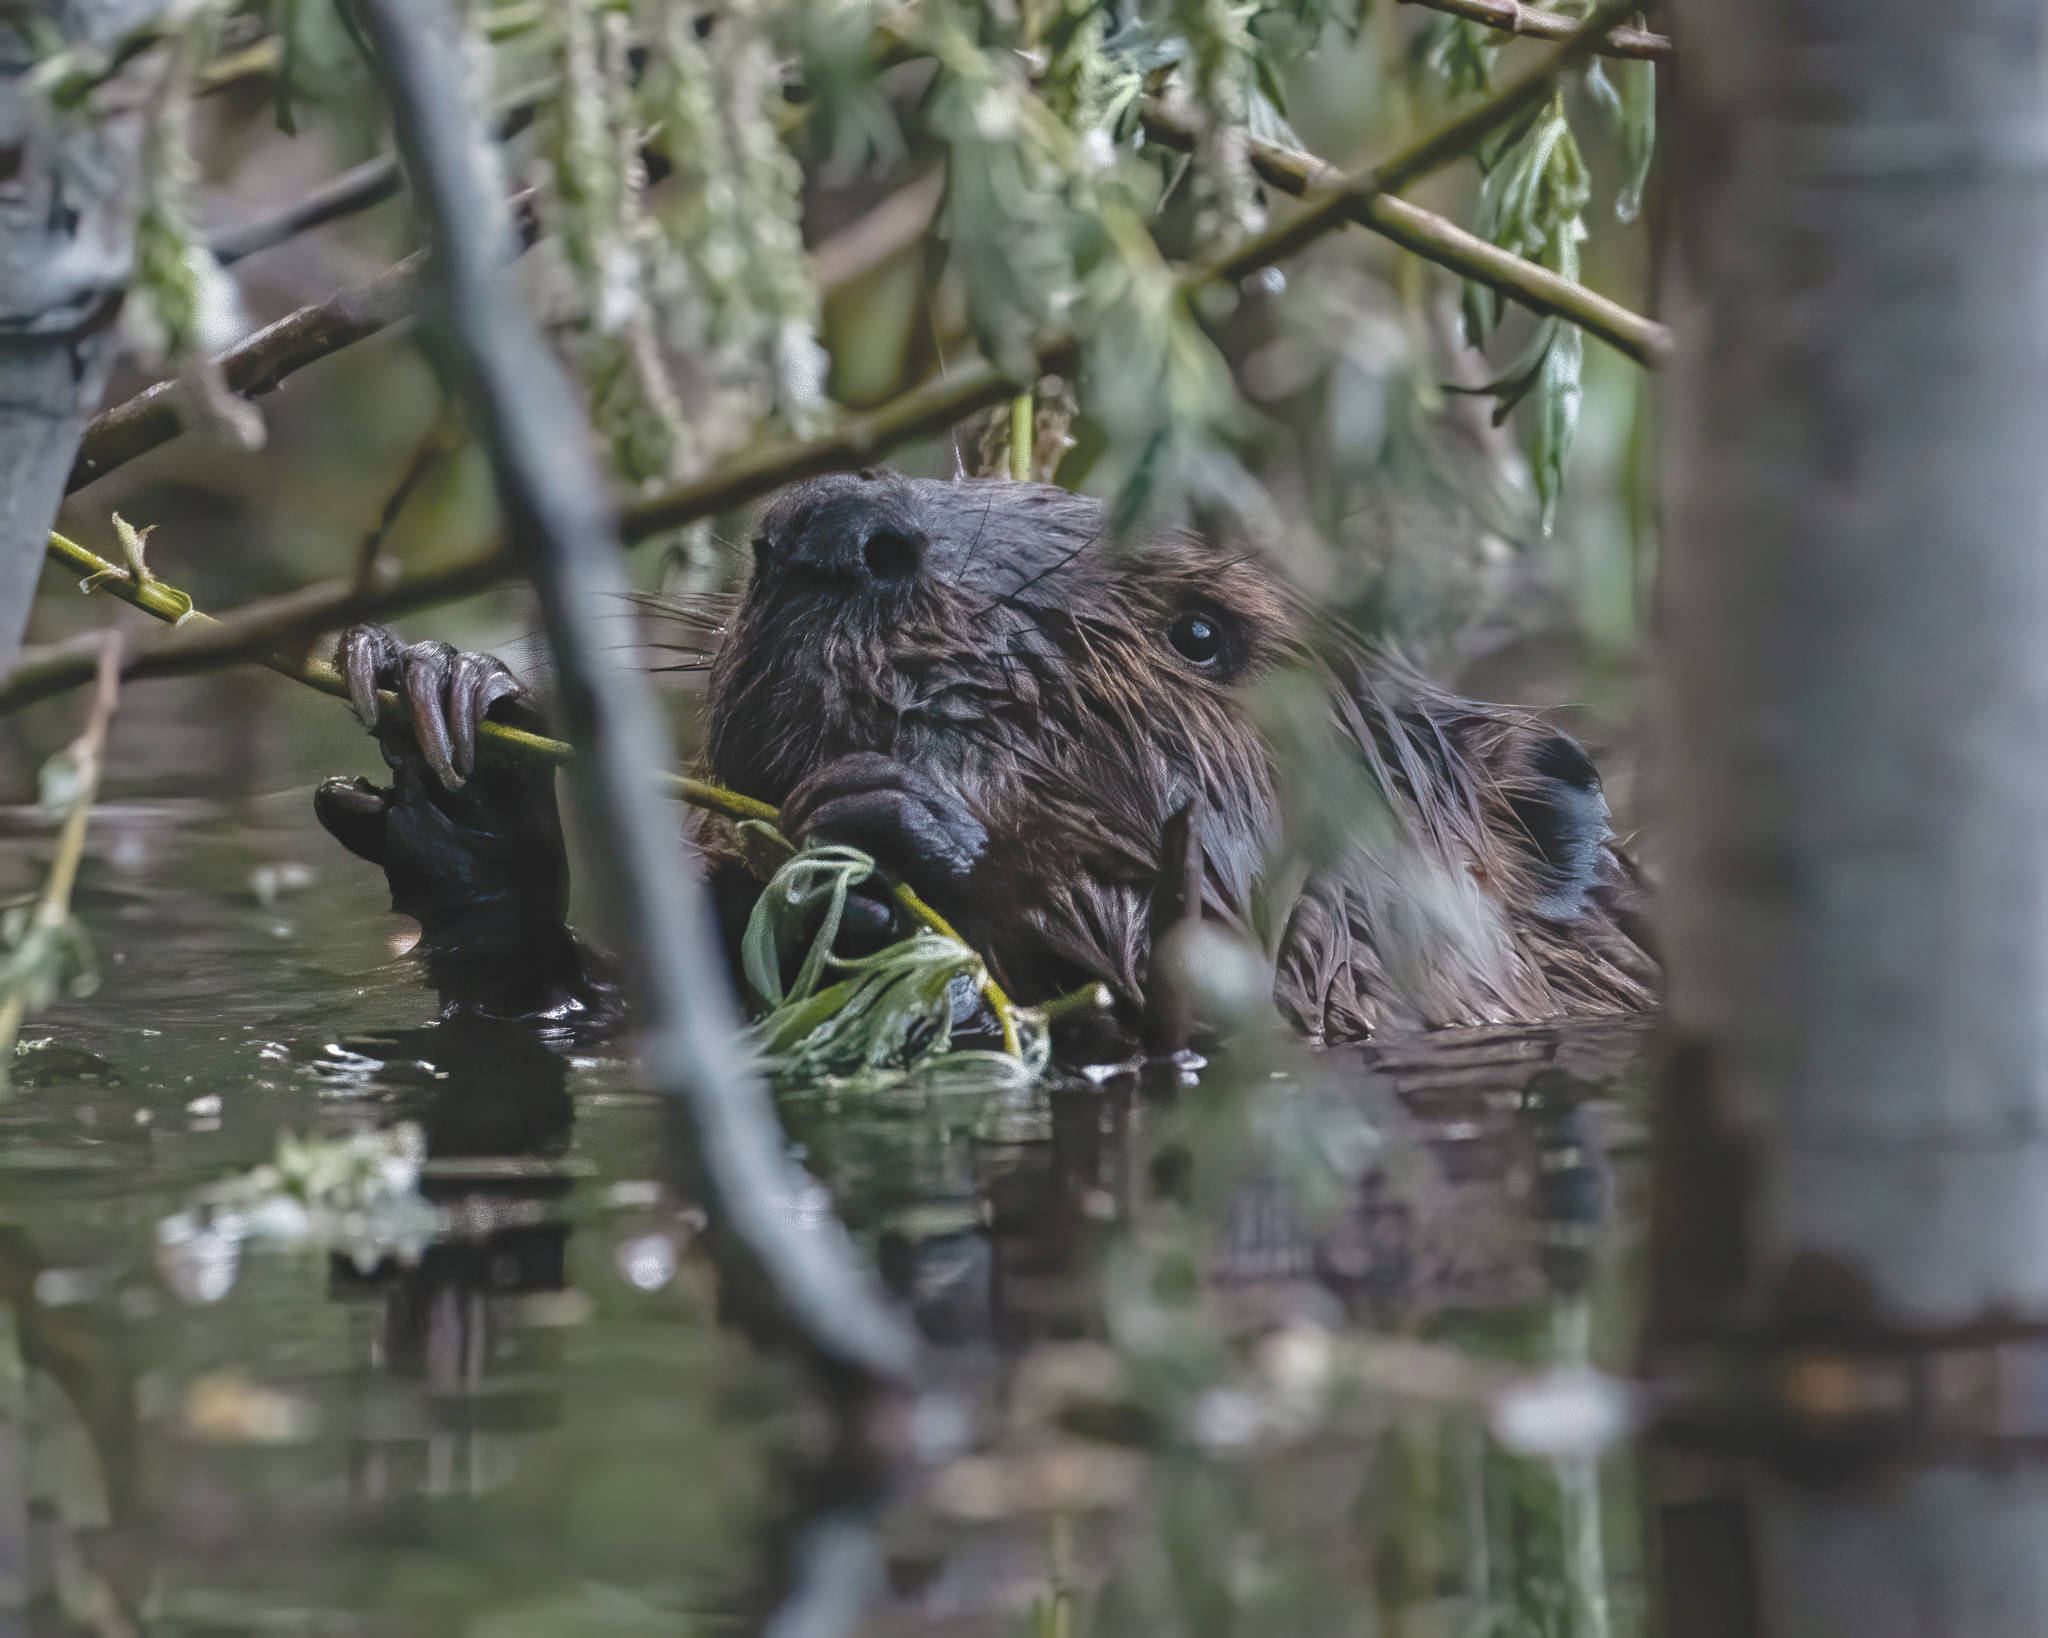 A young beaver enjoys a willow branch snack on a pond in the Skilak Wildlife Recreation Area. (Photo by Colin Canterbury, Kenai National Wildlife Refuge)